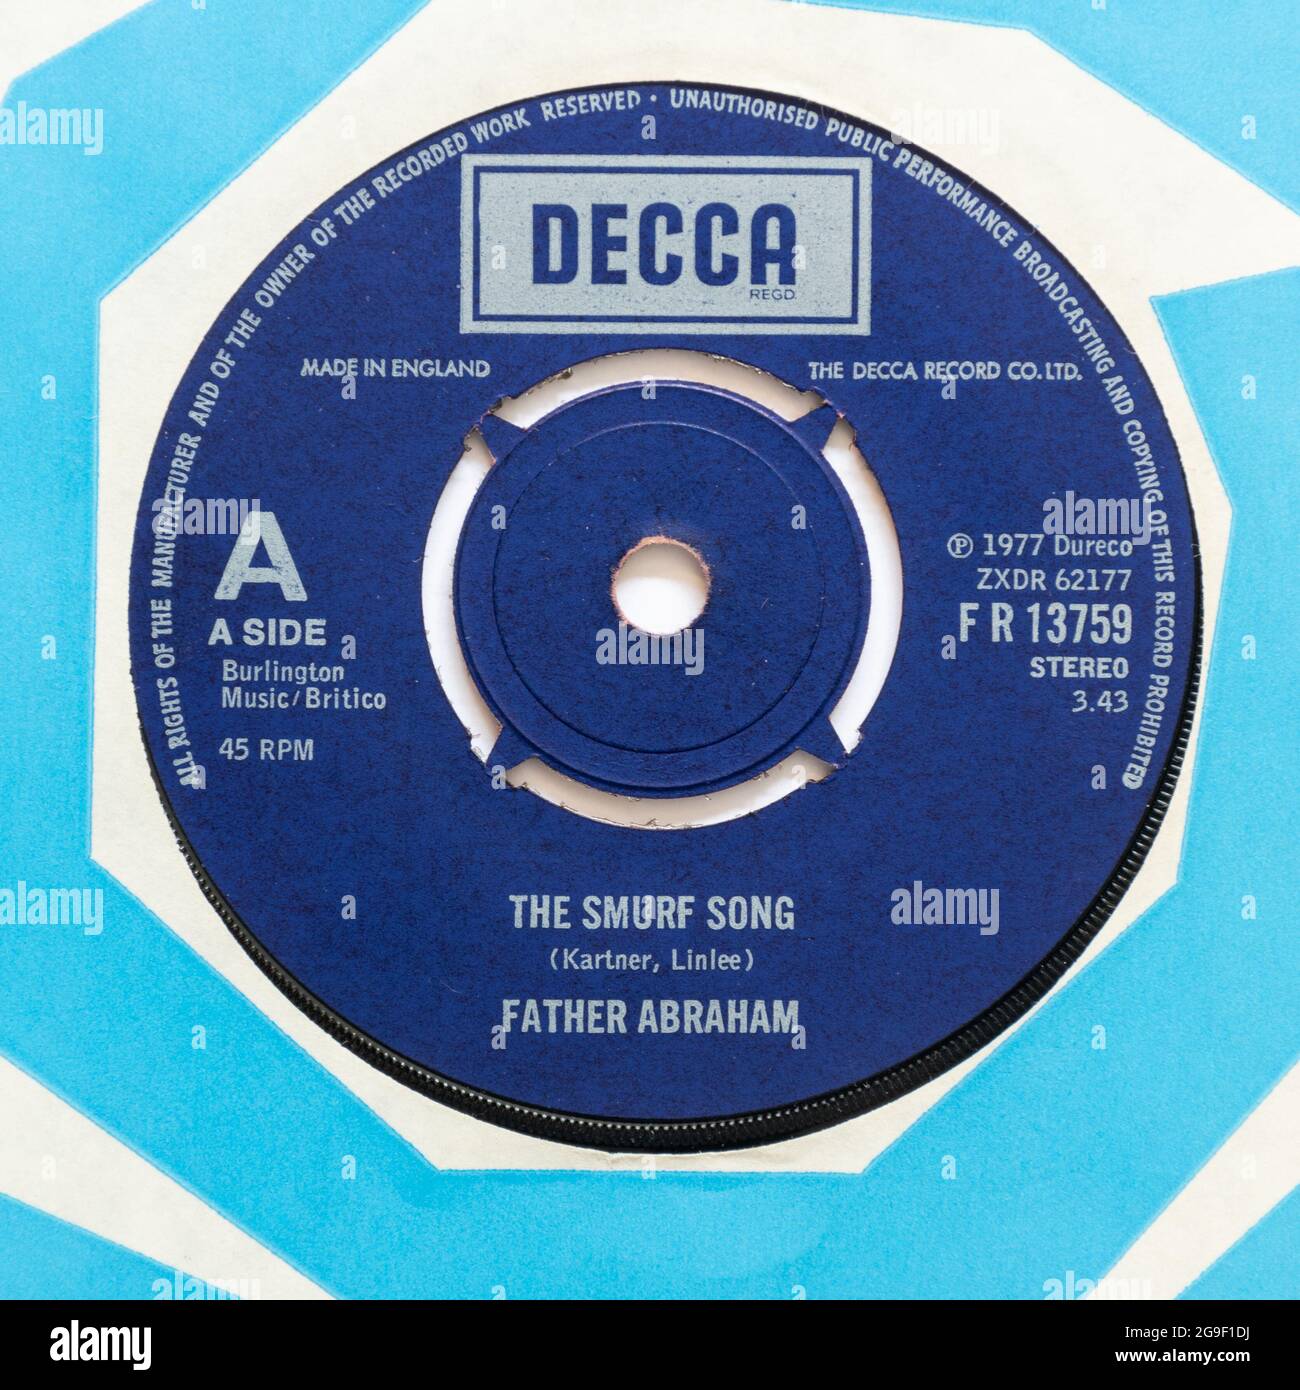 The Smurf Song by Father Abraham, a stock photo of the 7' single vinyl 45 rpm record in cover Stock Photo